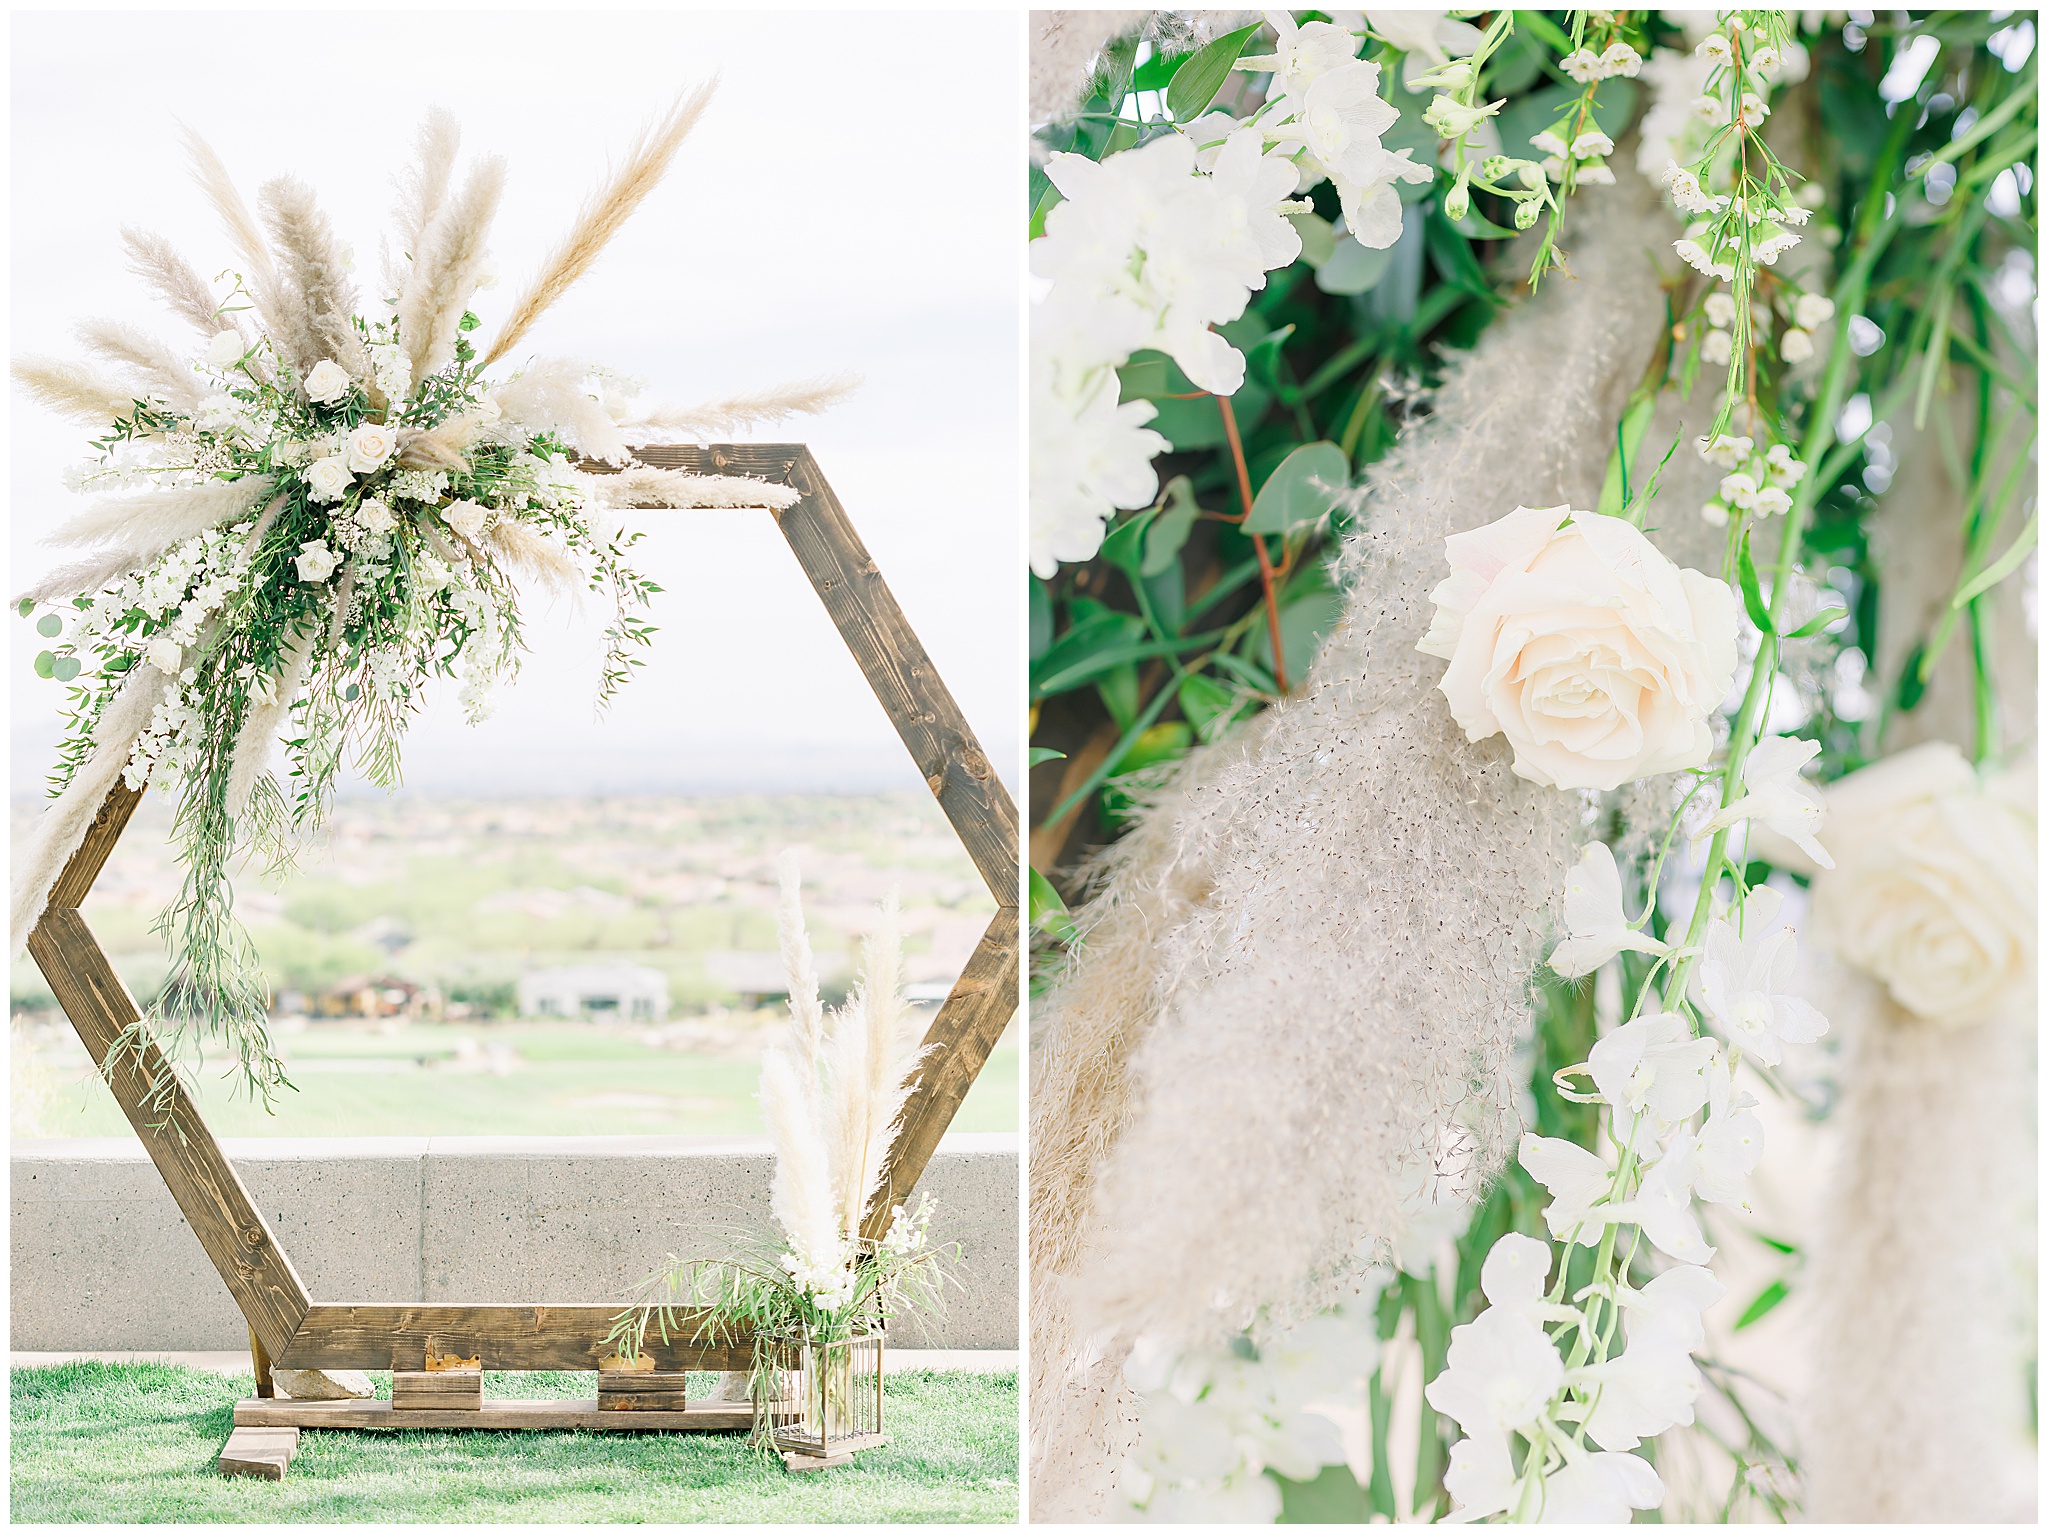 Bride Smiling, Hexagon Wooden Alter with Pompous Grass and White Roses on it